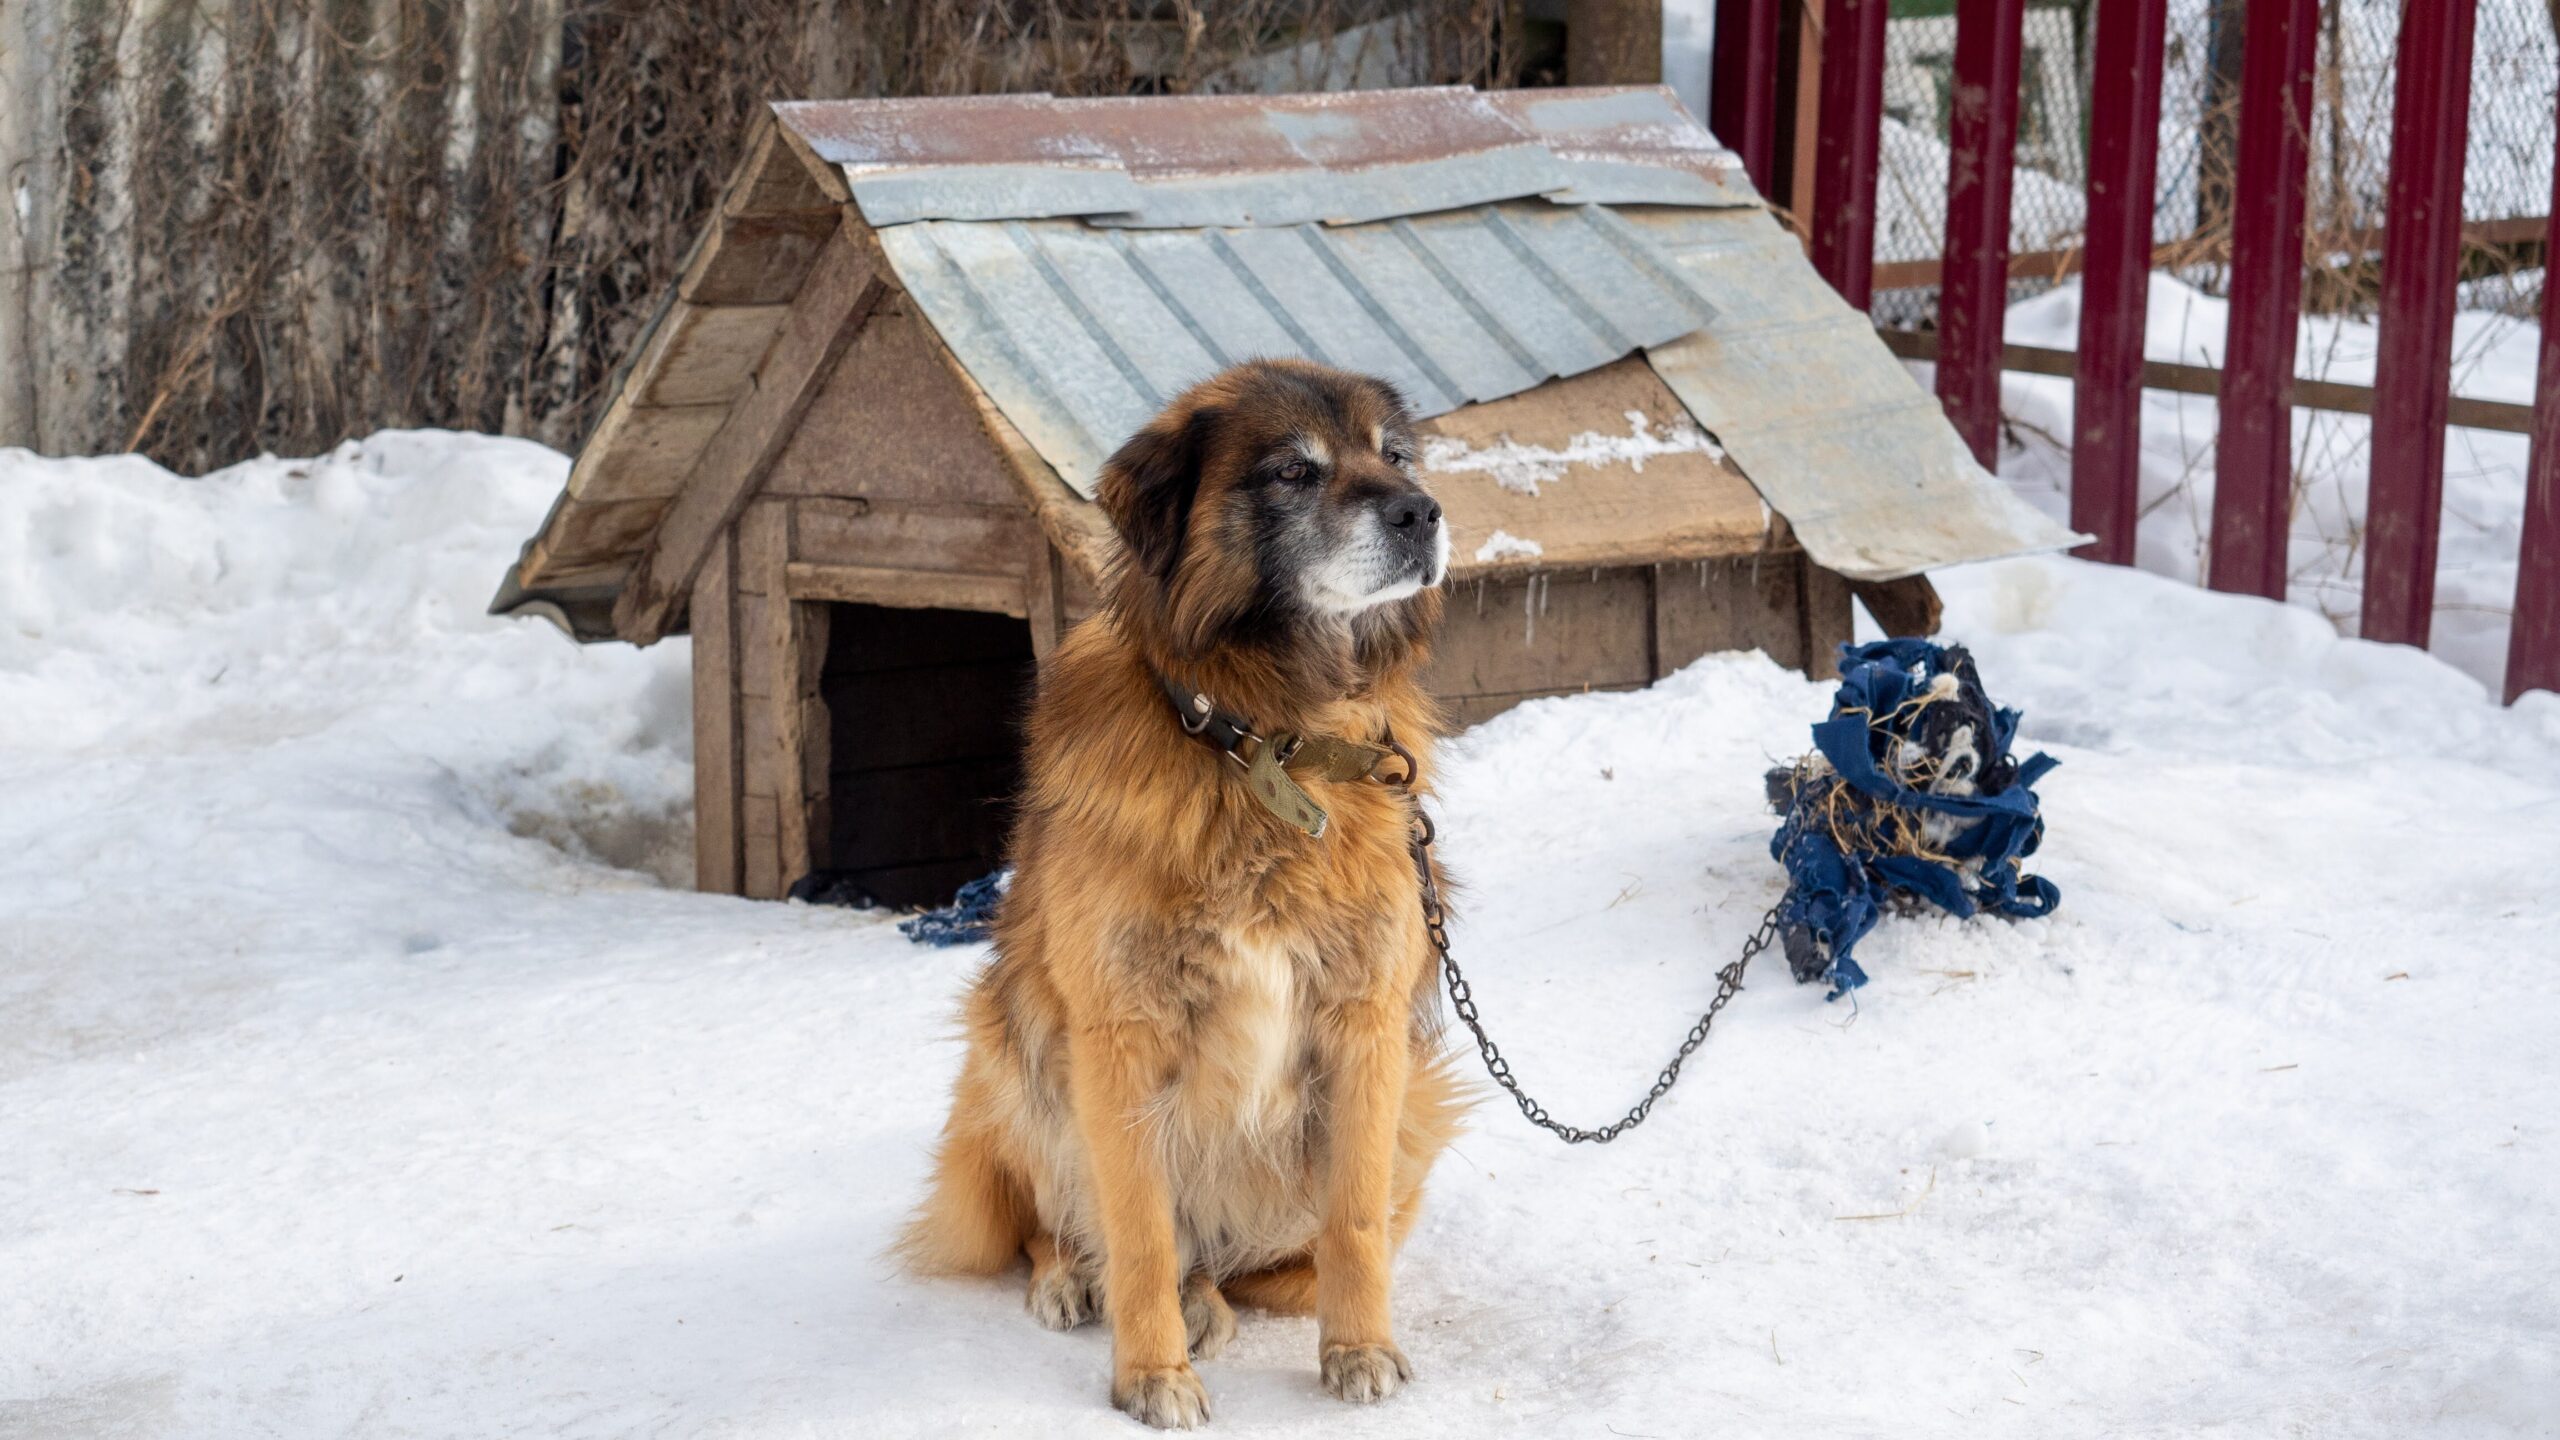 The yard dog sits near the kennel tied with a chain in winter. Dogs, home security